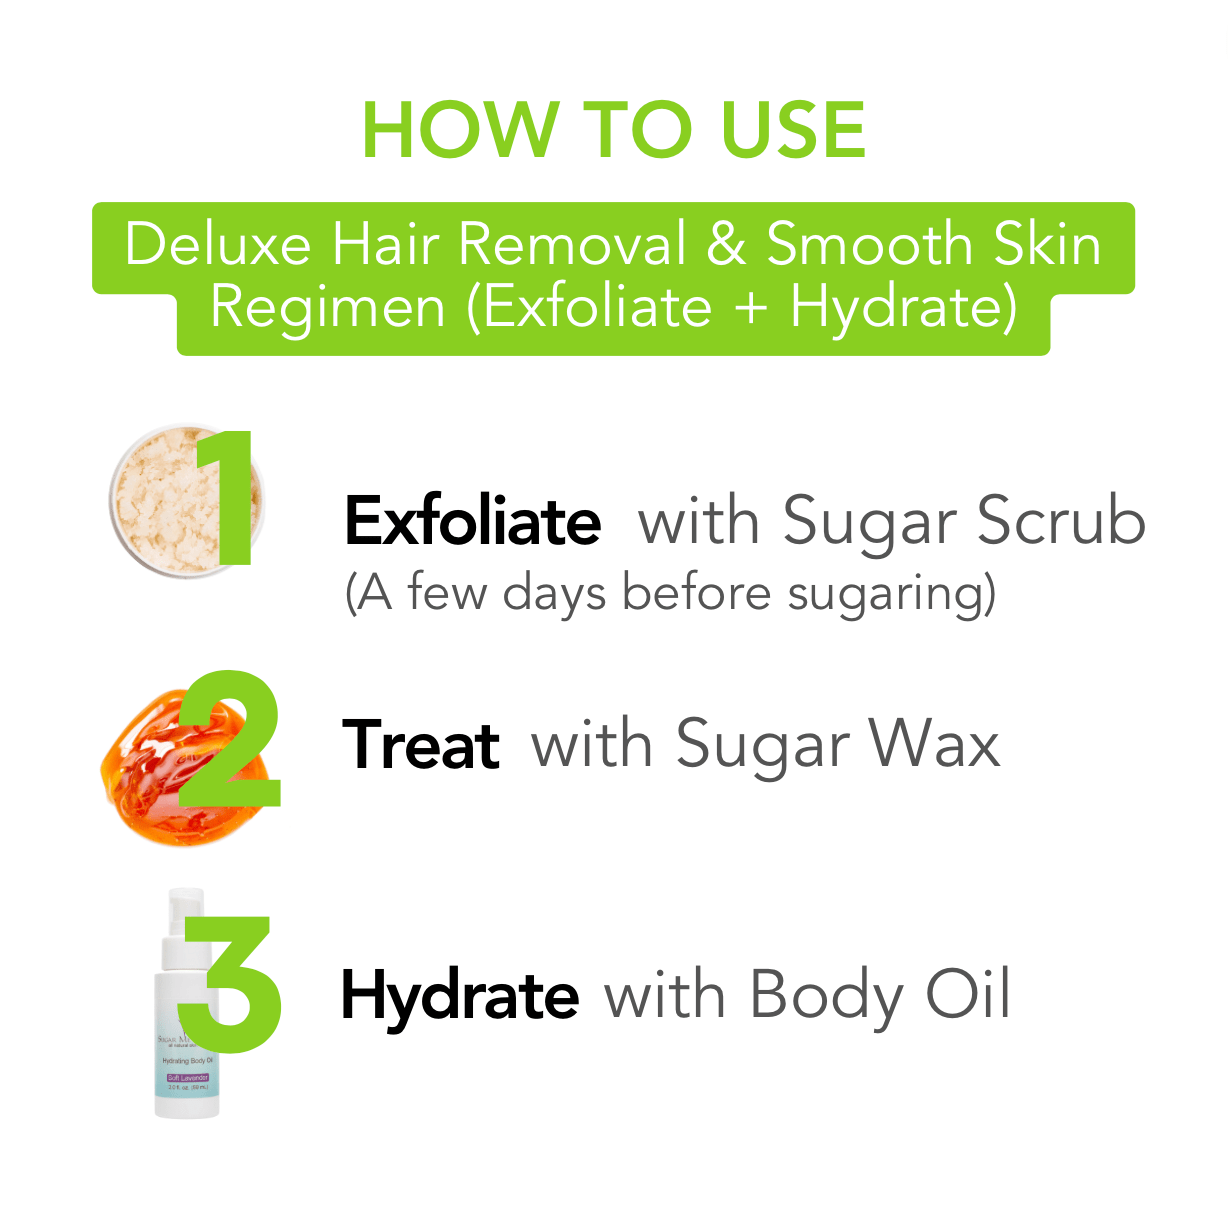 Deluxe Hair Removal & Smooth Skin Regimen (Exfoliate + Hydrate)